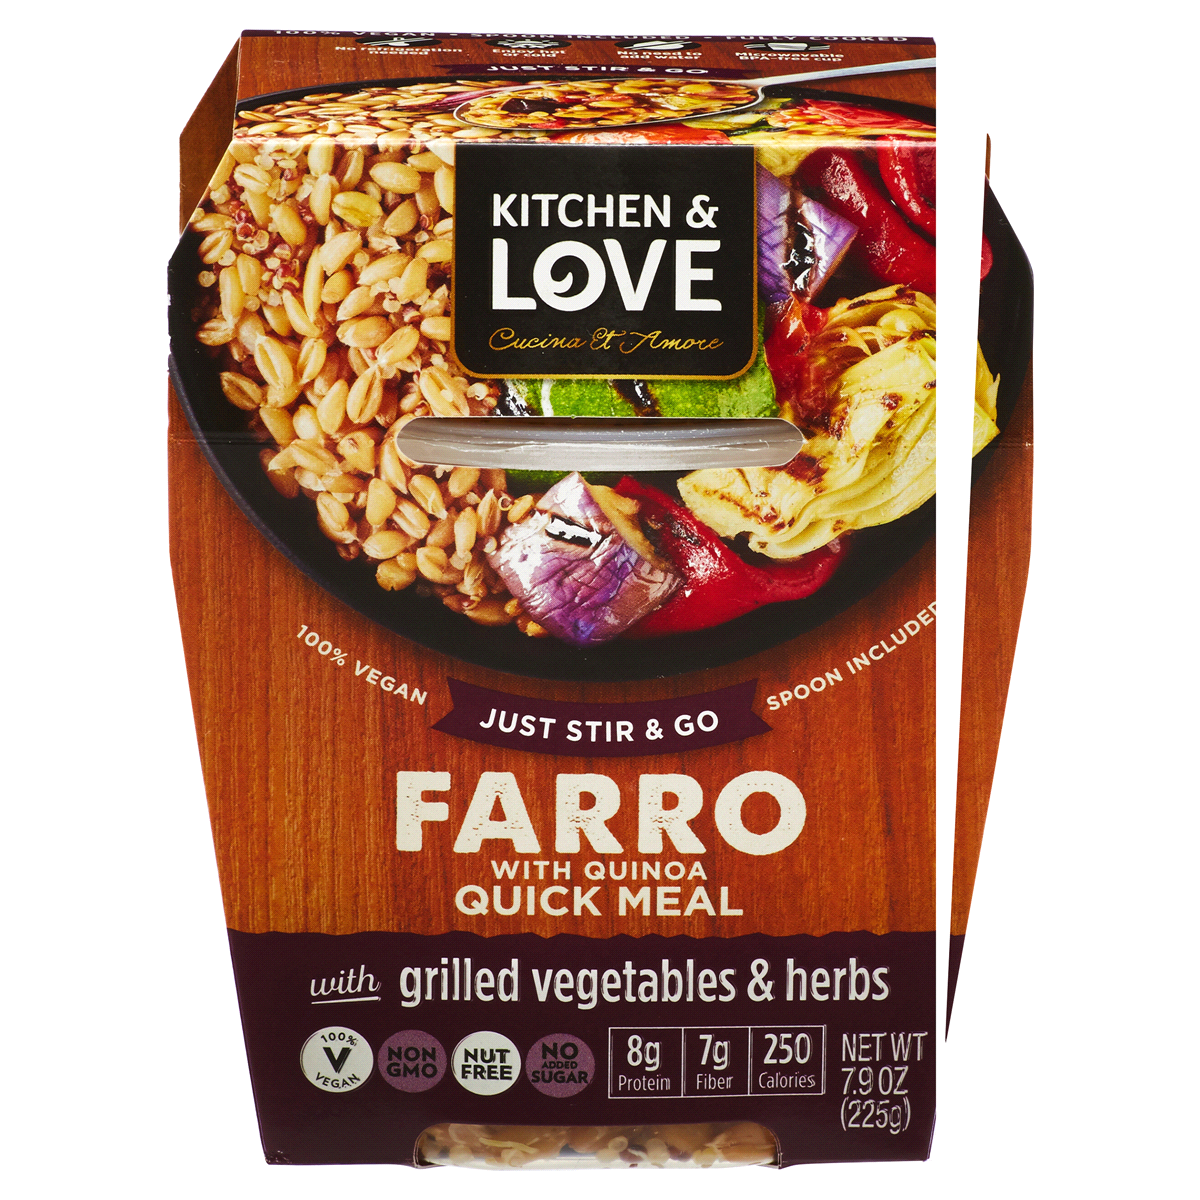 slide 1 of 1, Cucina & Amore Farro with Quinoa Quick Meal, Grilled Vegetables & Herbs, 7.9 oz